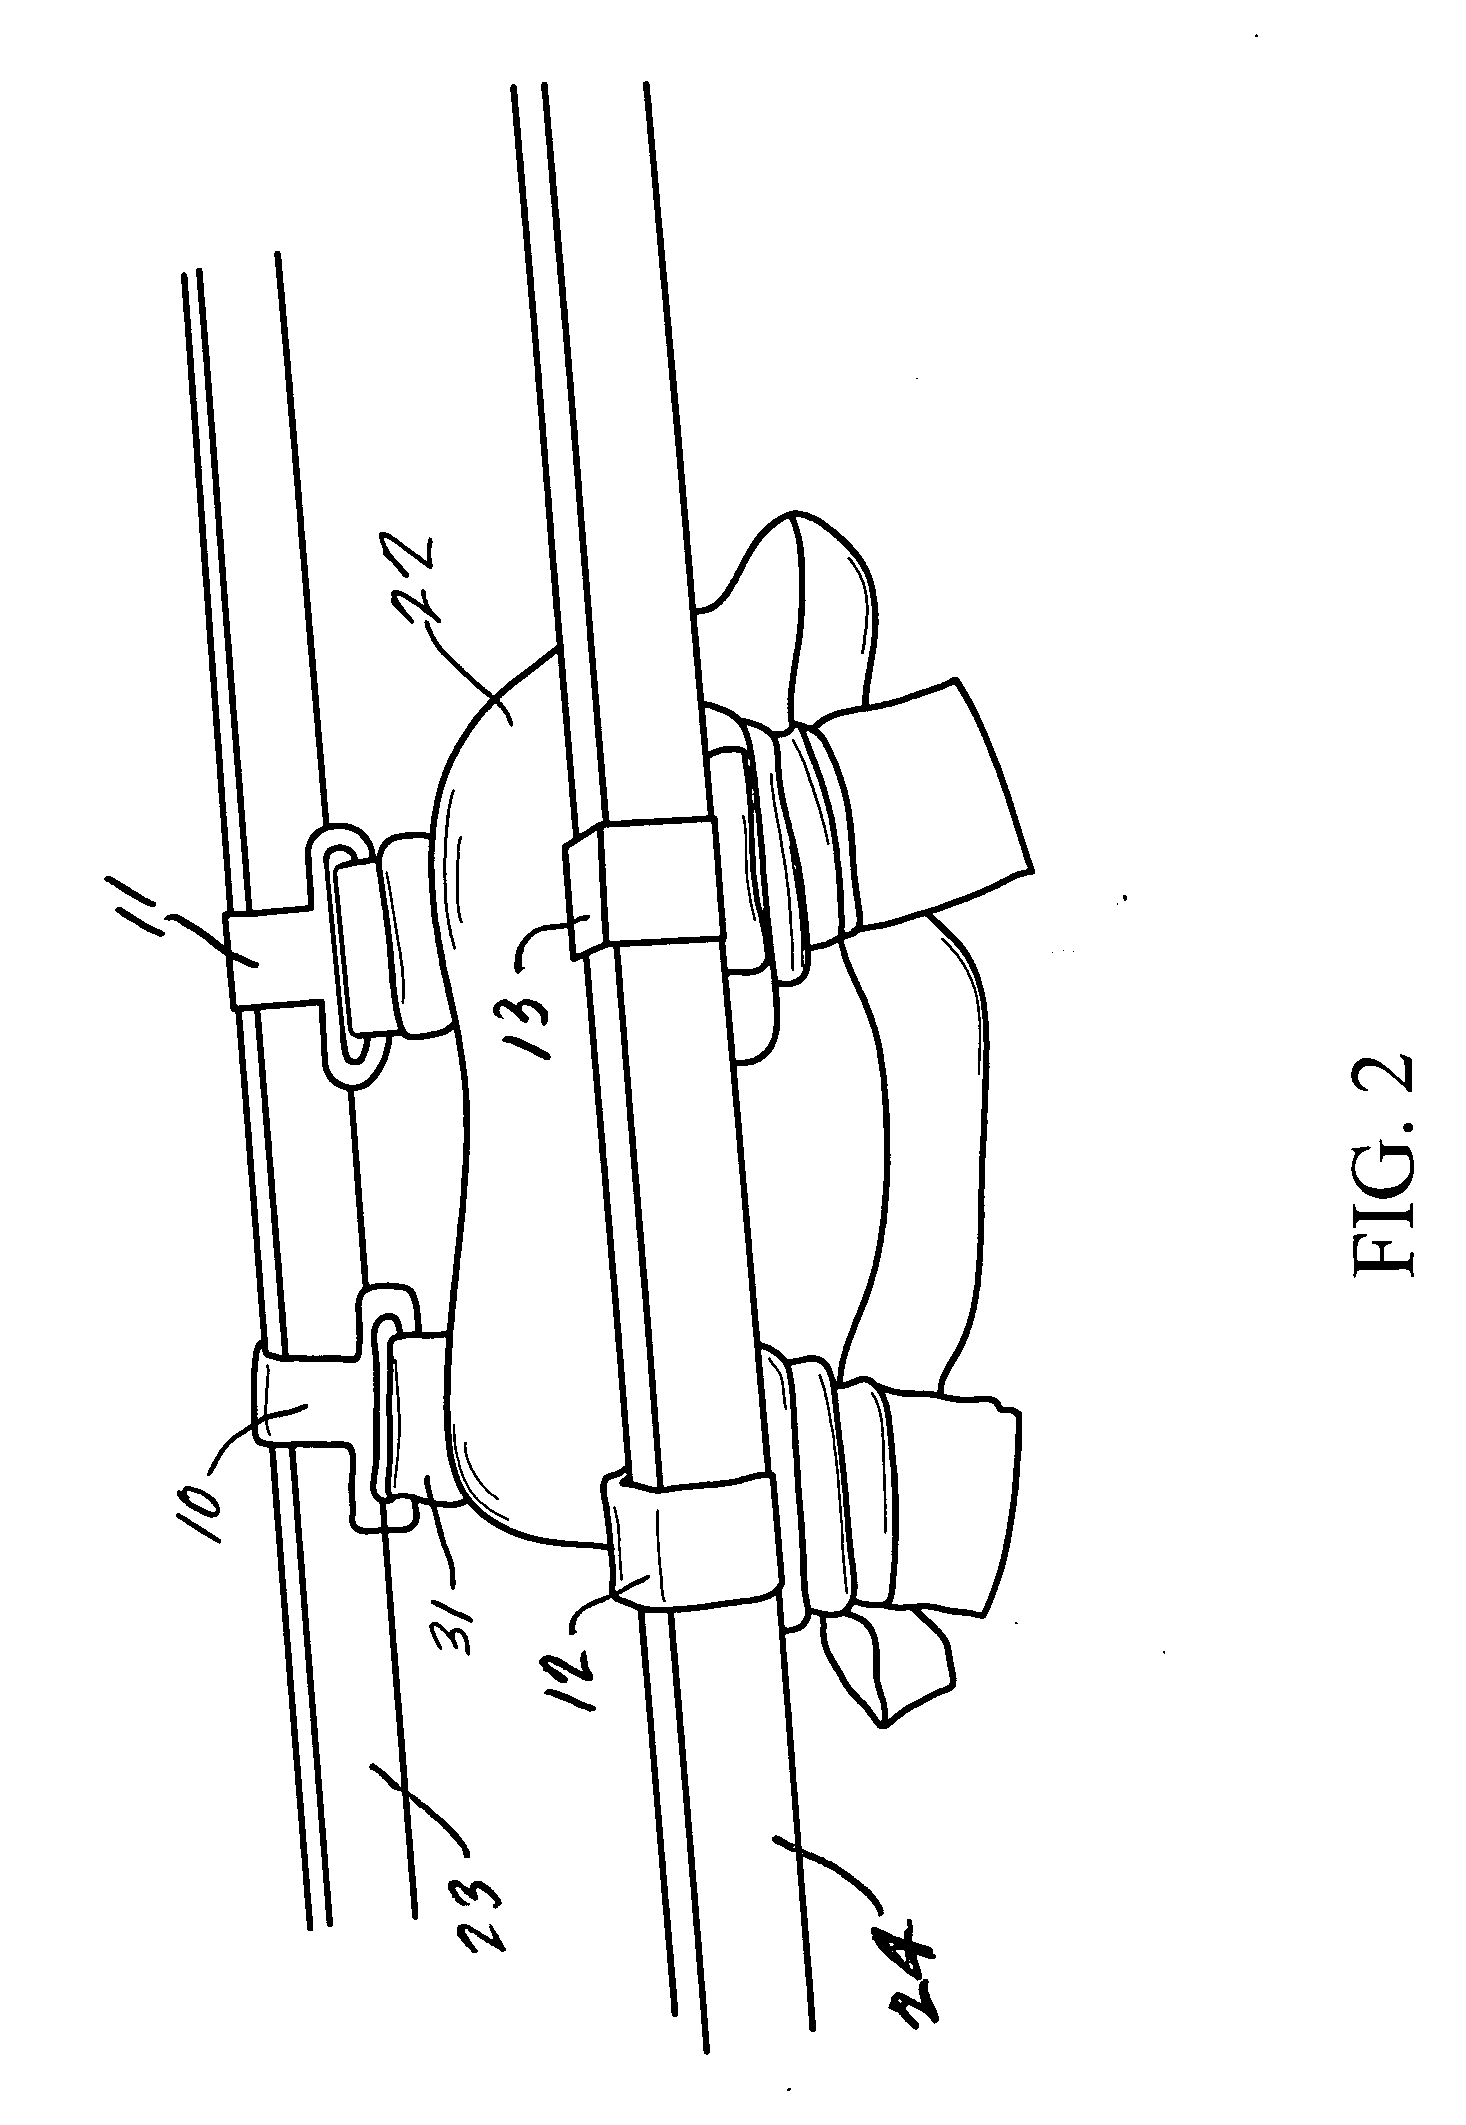 Suspended seat bracket hook device, and methods of constructing and utilizing same